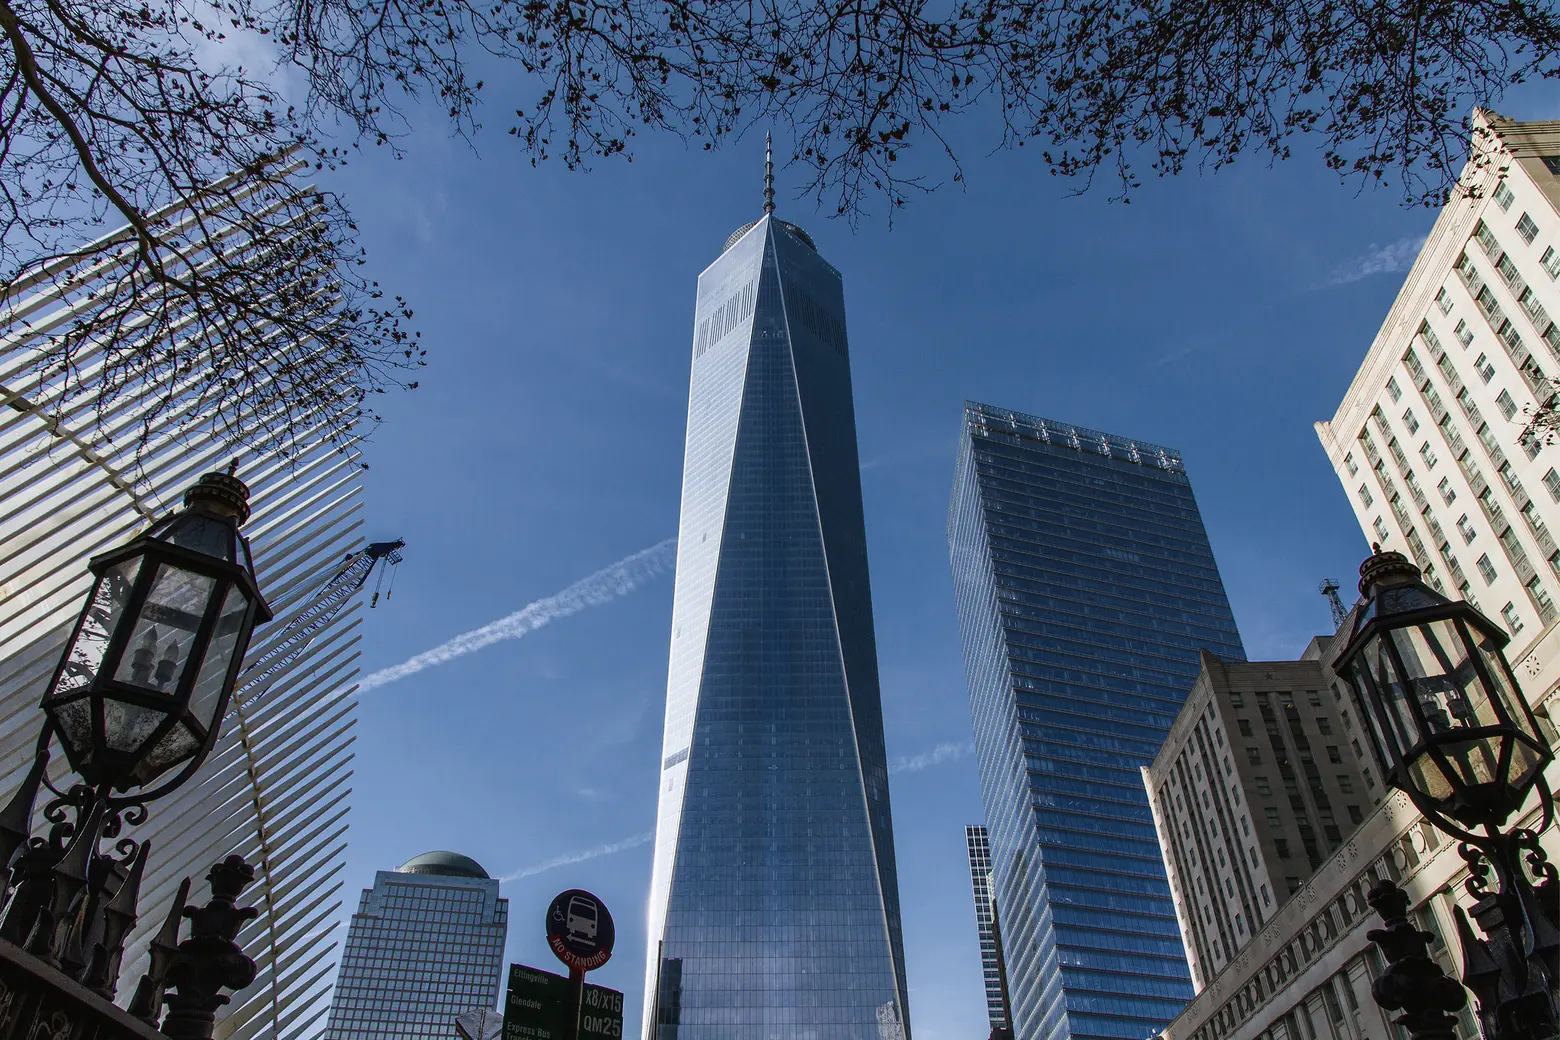 As plans for 5 WTC push forward, long-time FiDi residents seek more involvement in the process